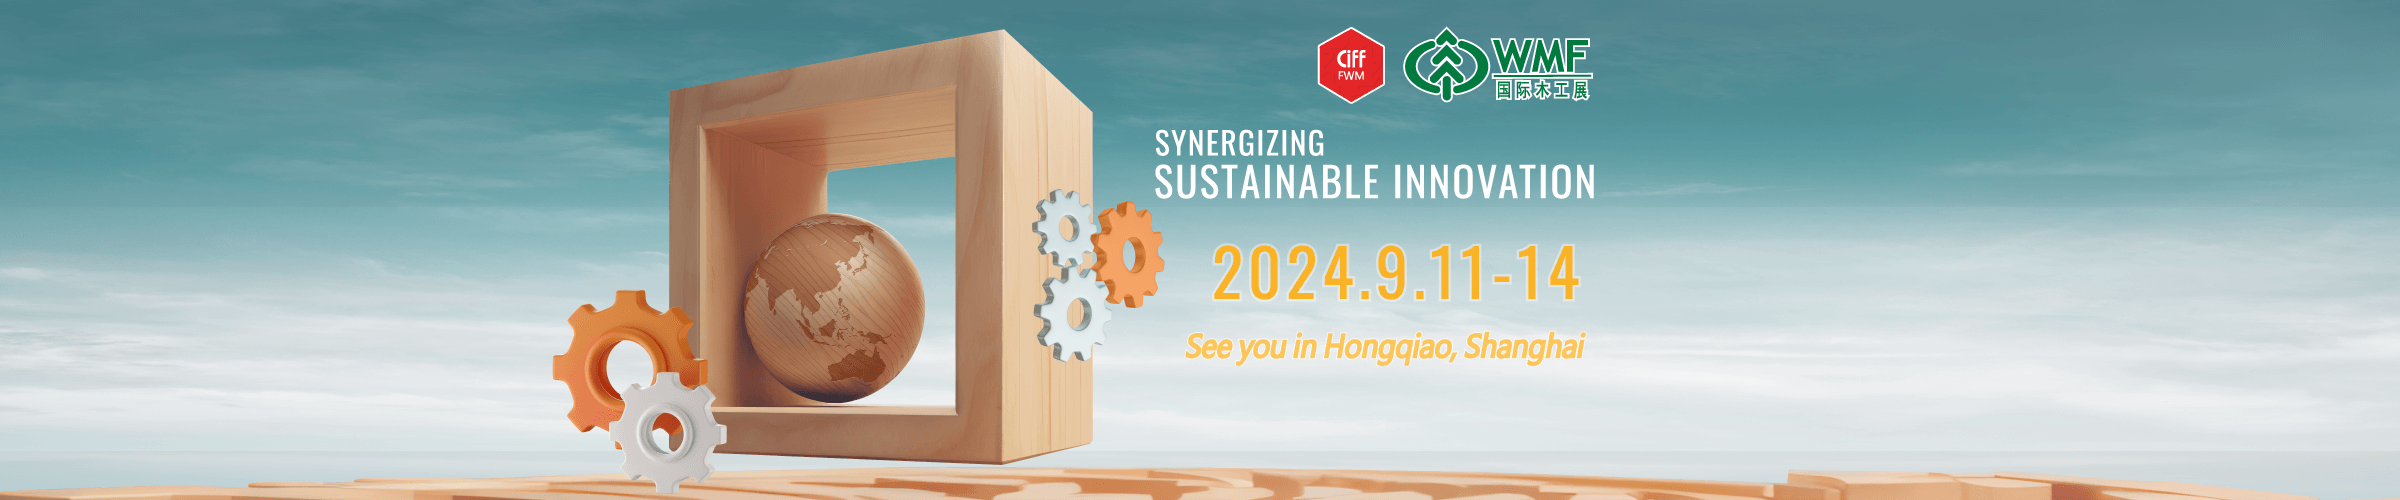 SYNERGIZING SUSTAINABLE INNOVATION 2024.9.11-14 See you in Hongqiao Shanghai